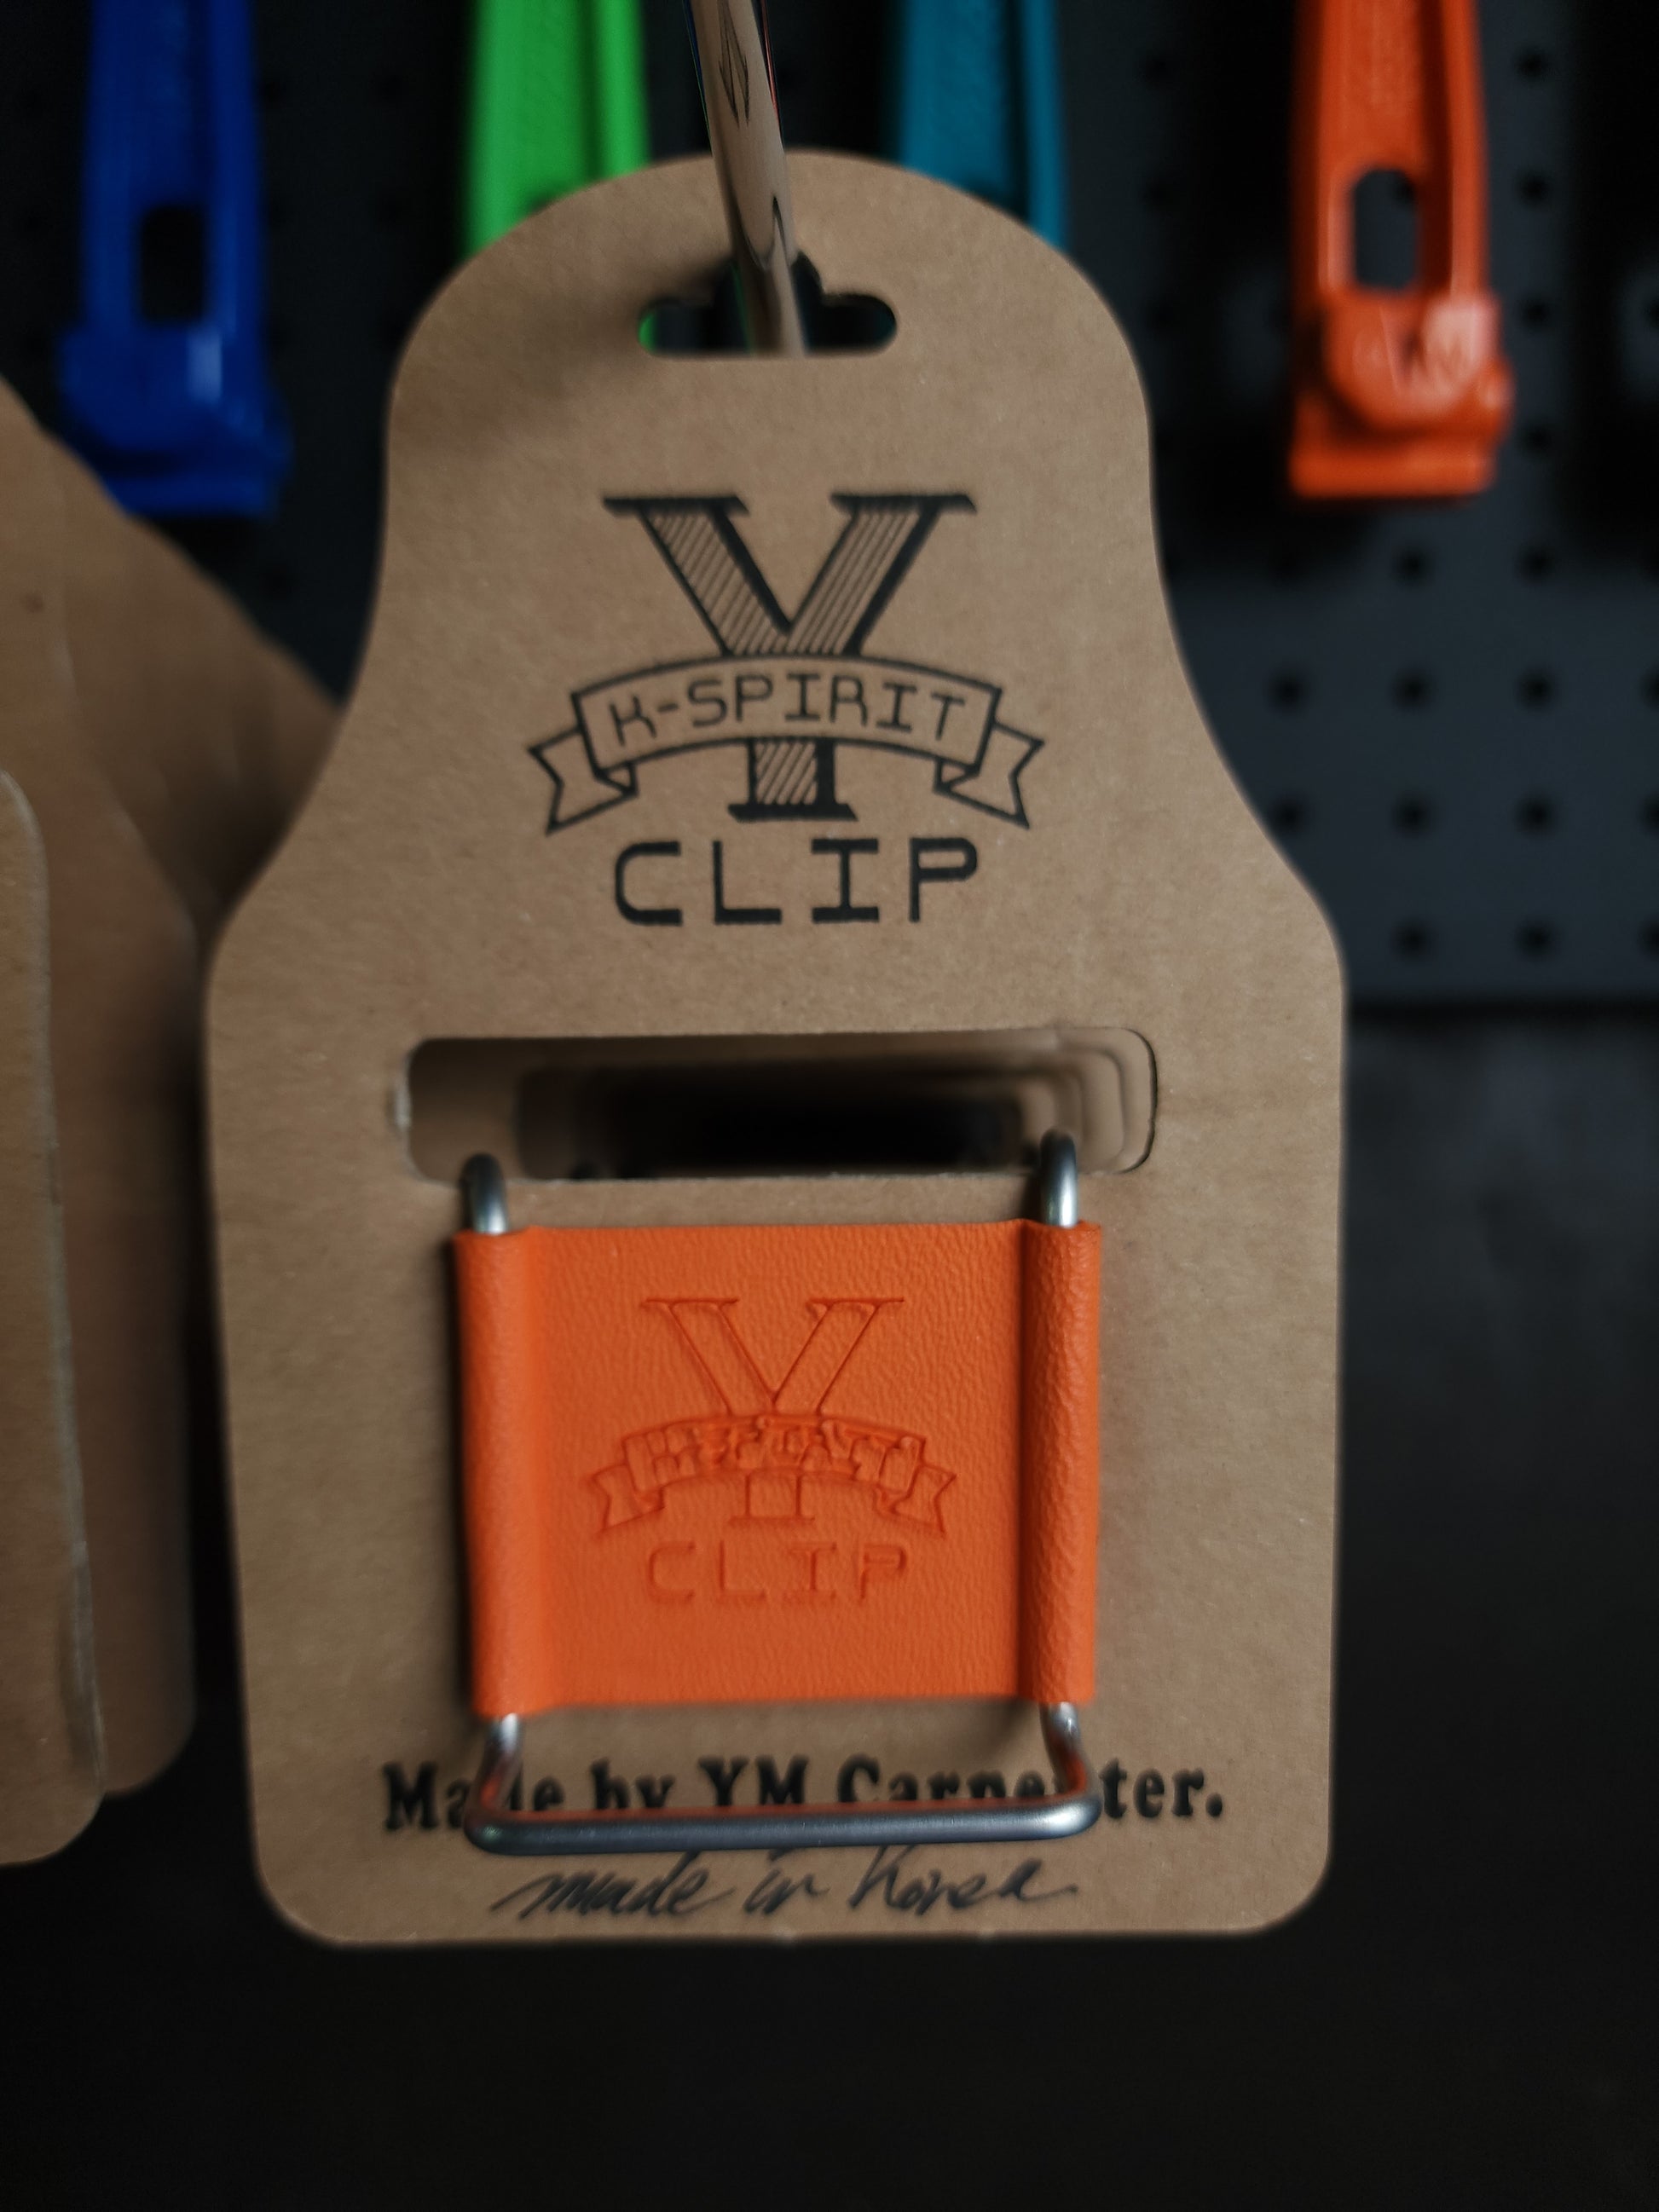 Handcrafted Y-Clip hanger by YM Carpenter displayed with a tape measure.